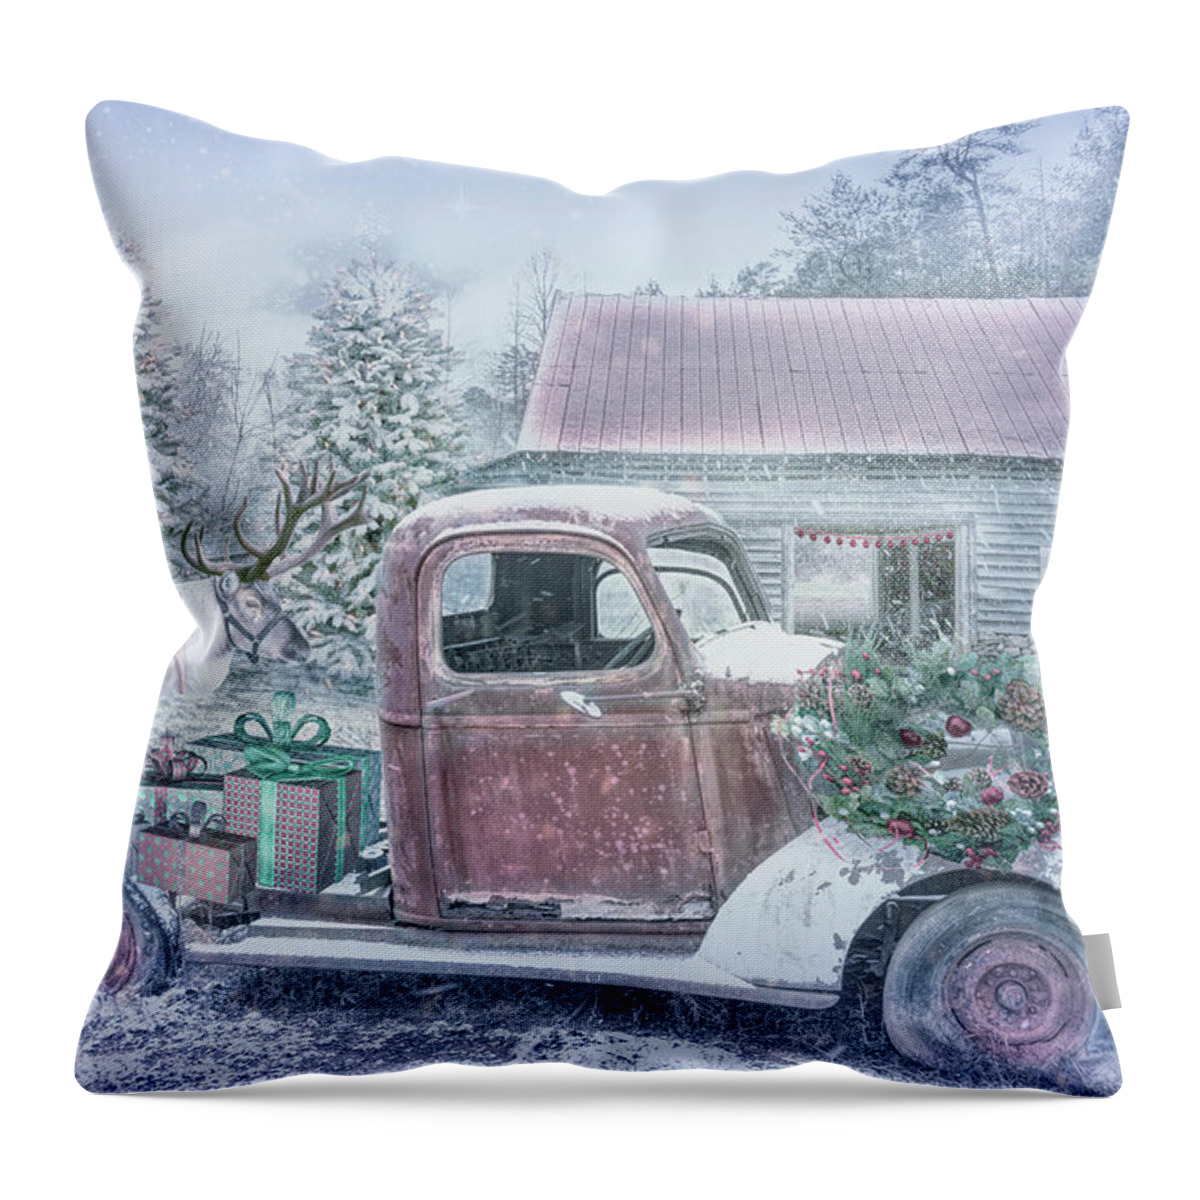 Barns Throw Pillow featuring the photograph Christmas Eve Reindeer in Pale Tones by Debra and Dave Vanderlaan